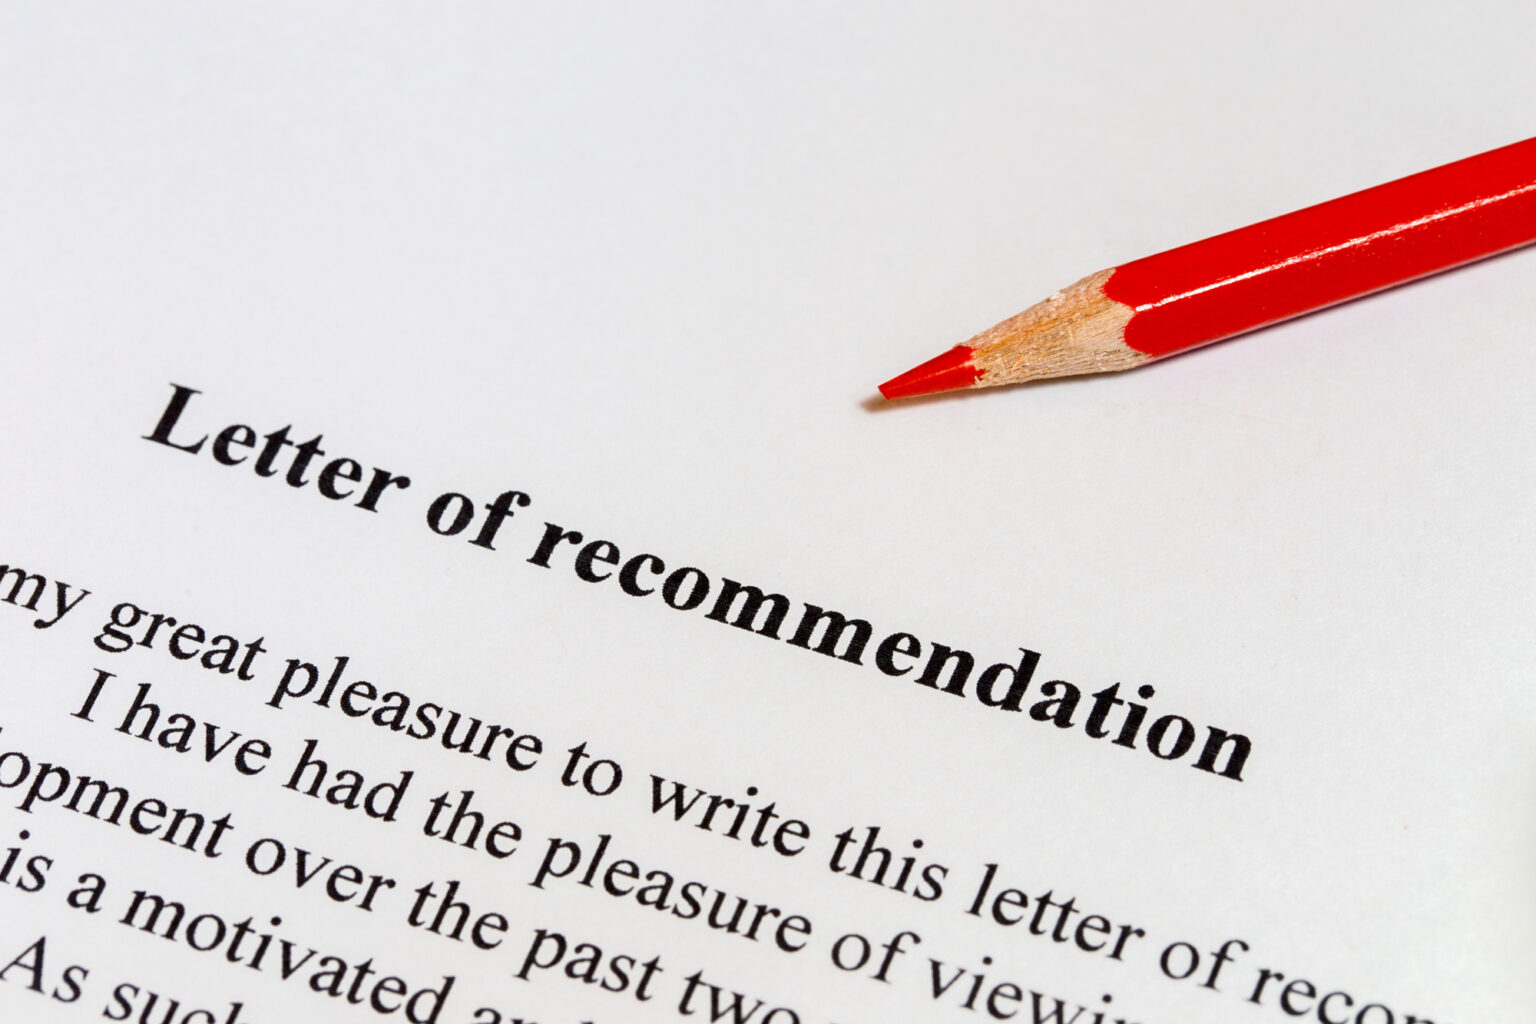 City Carrier Letter of Recommendation Template: Tips and Samples 1